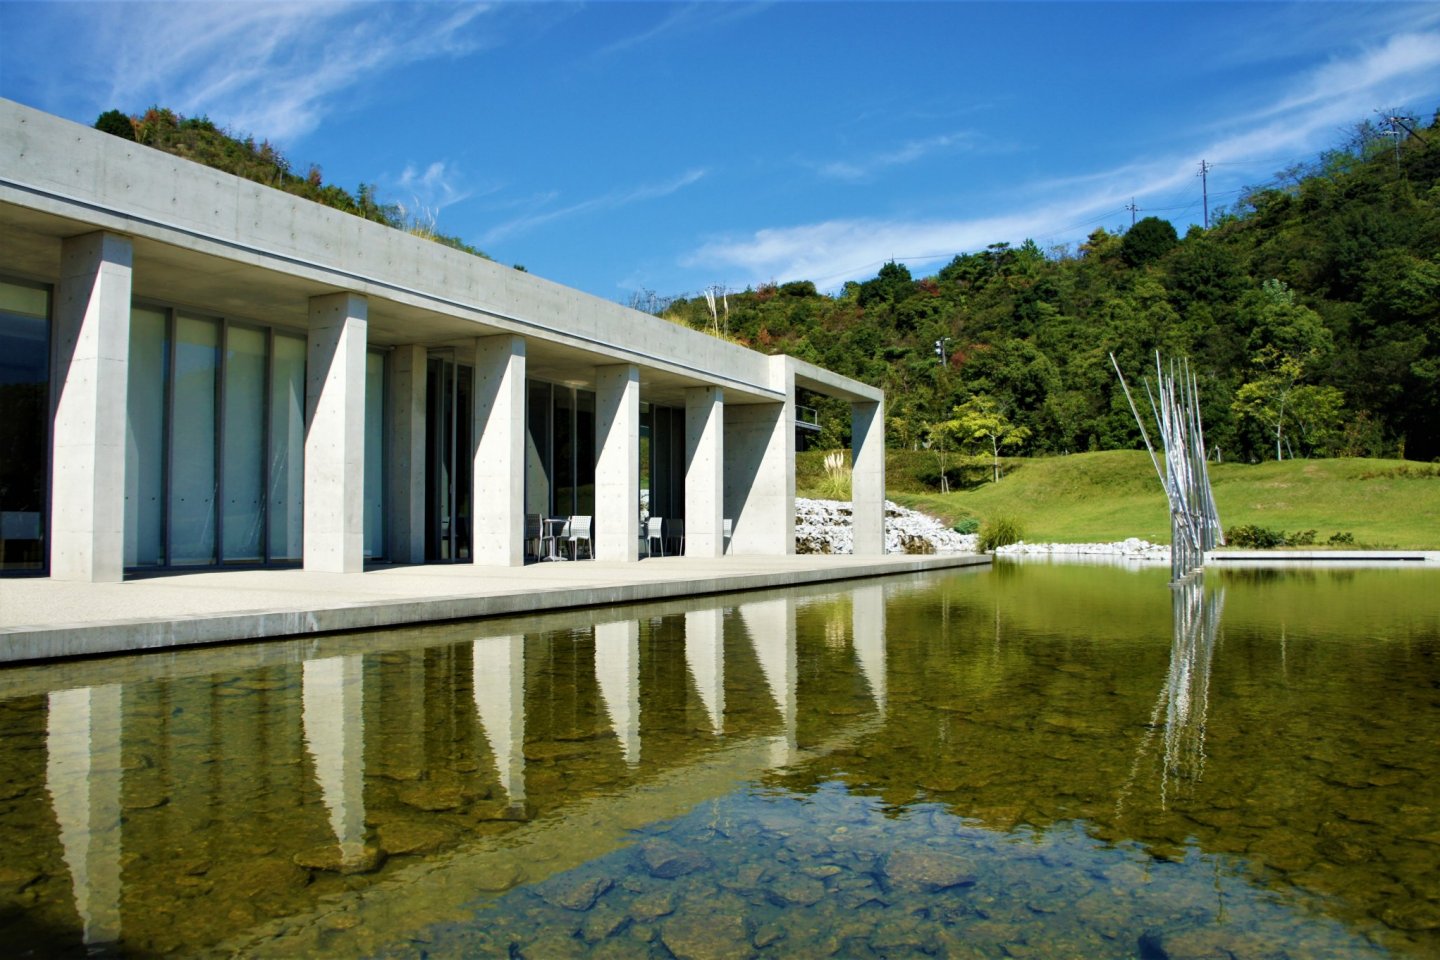 Water, sunshine and sky - Benesse House makes the most of these three elements